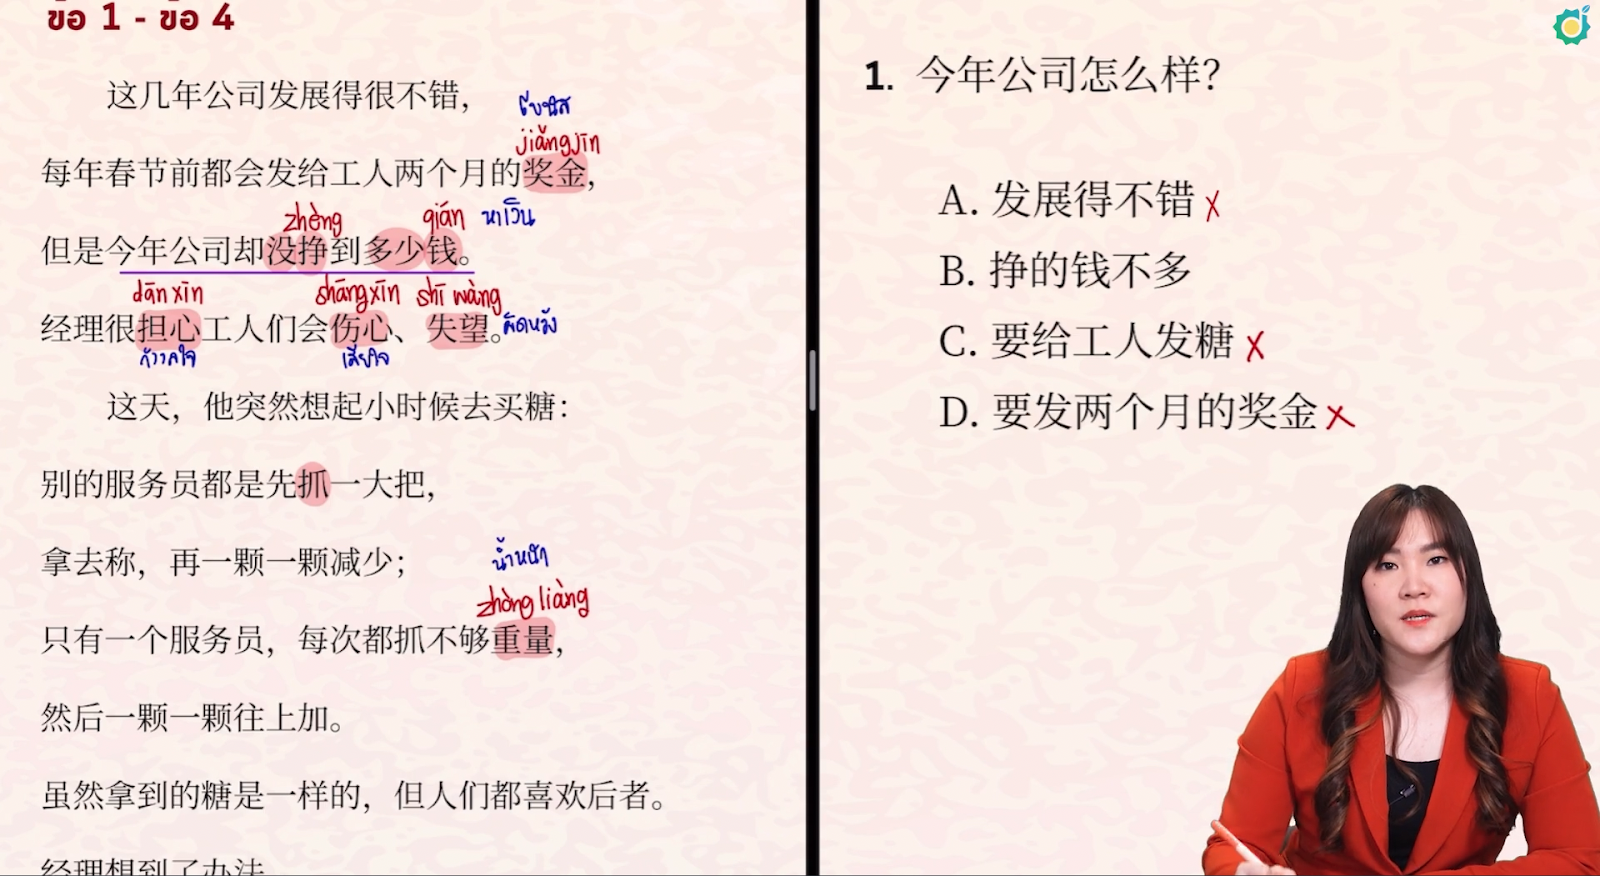 New tutor is explaining why this question in the HSK5 reading part has to be answered B.